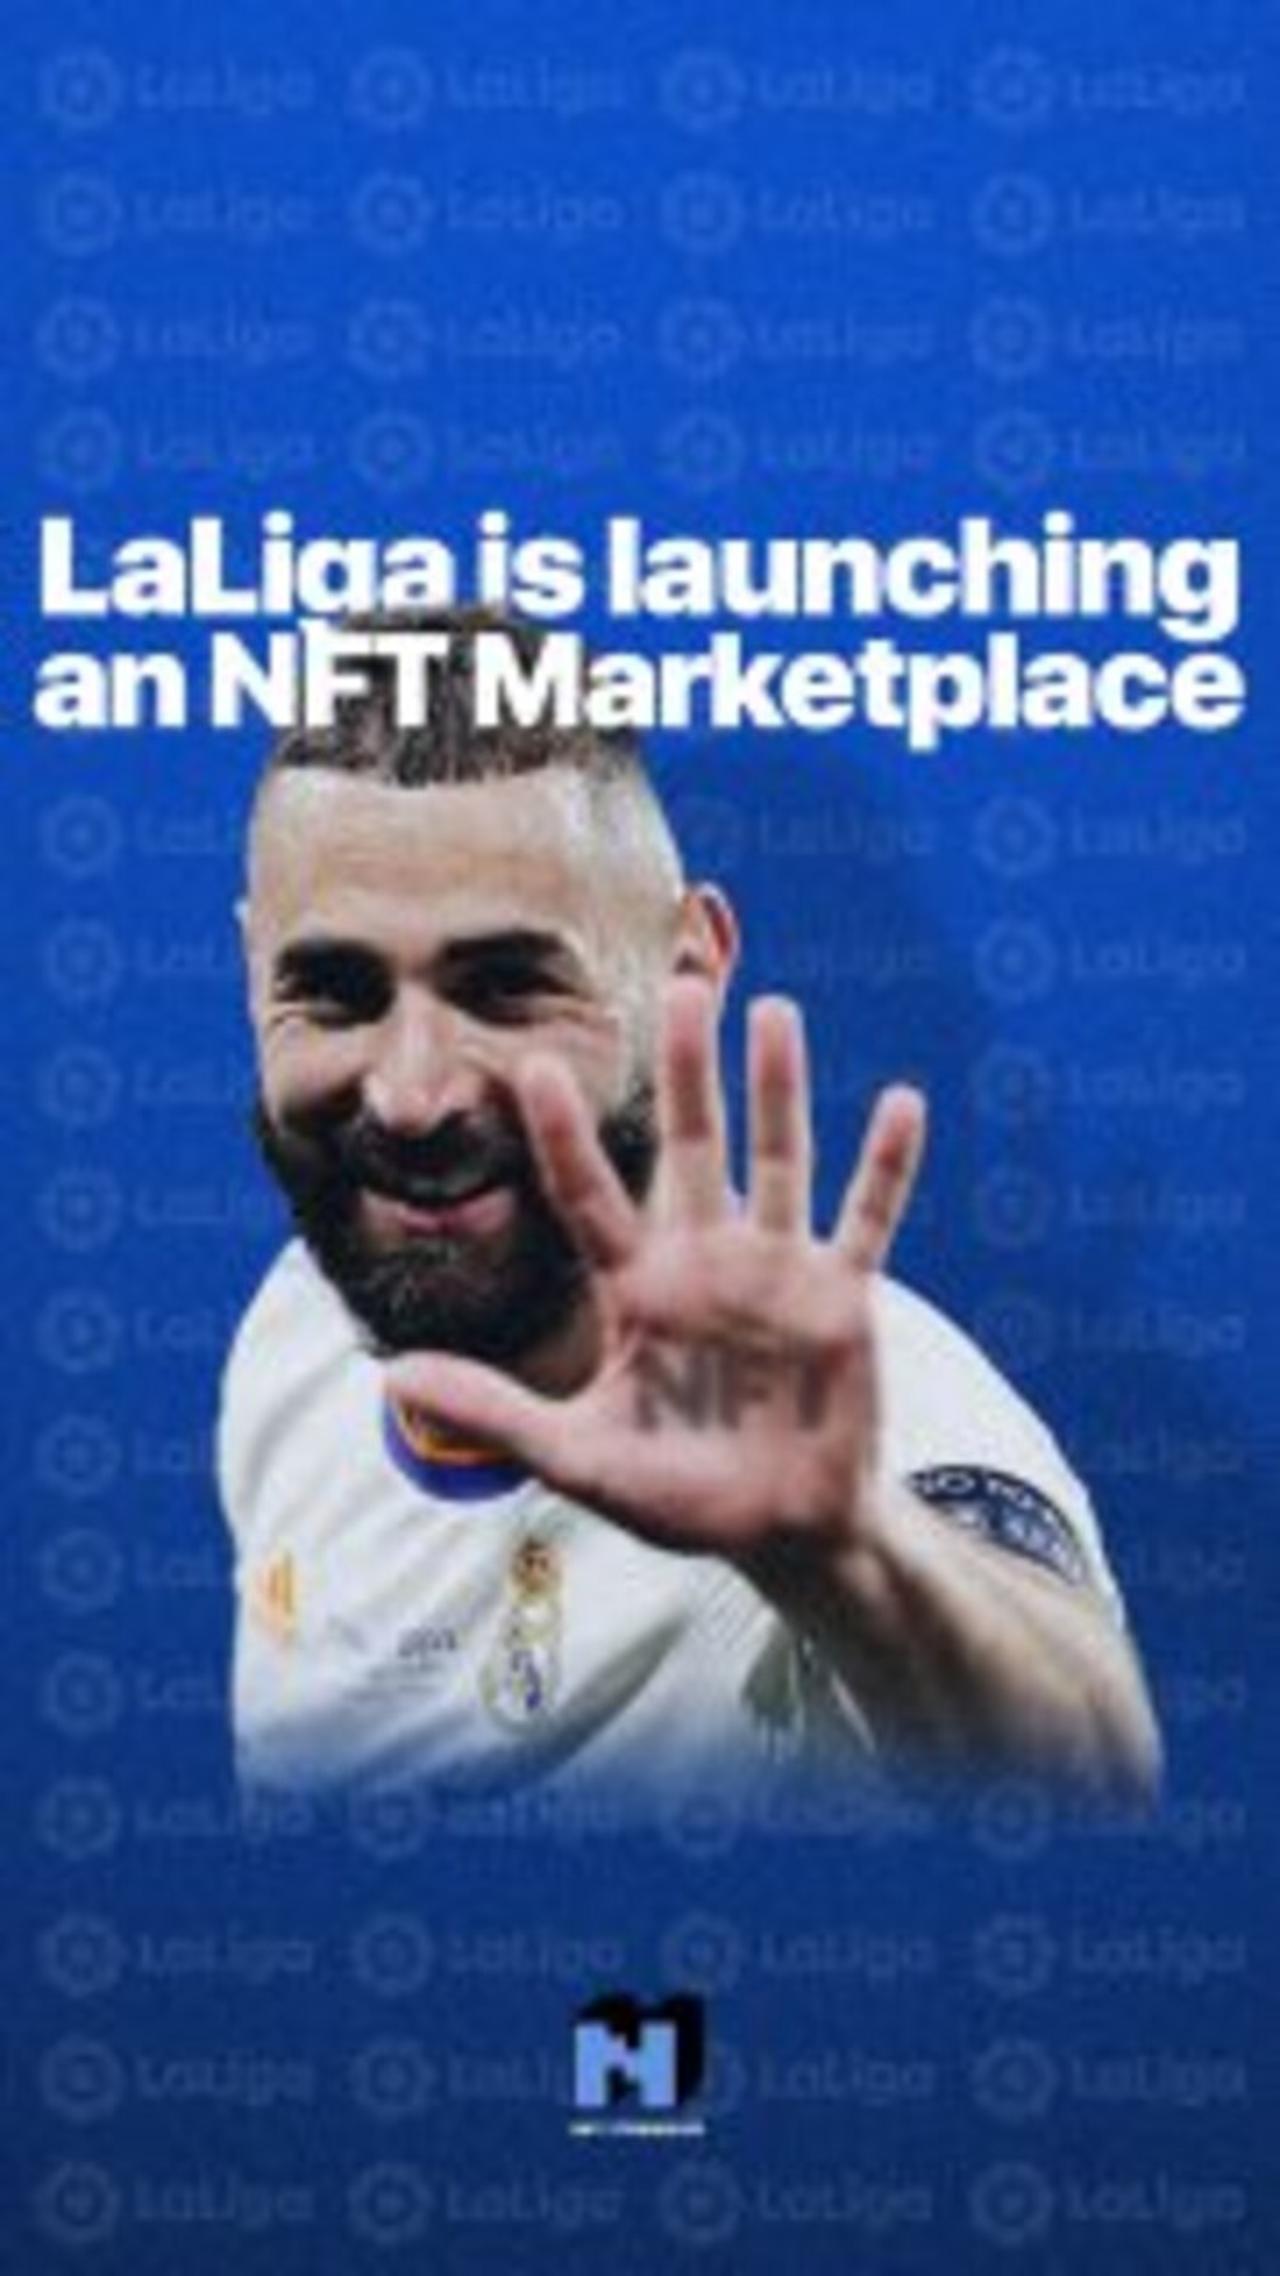 Laliga is launching an NFT marketplace